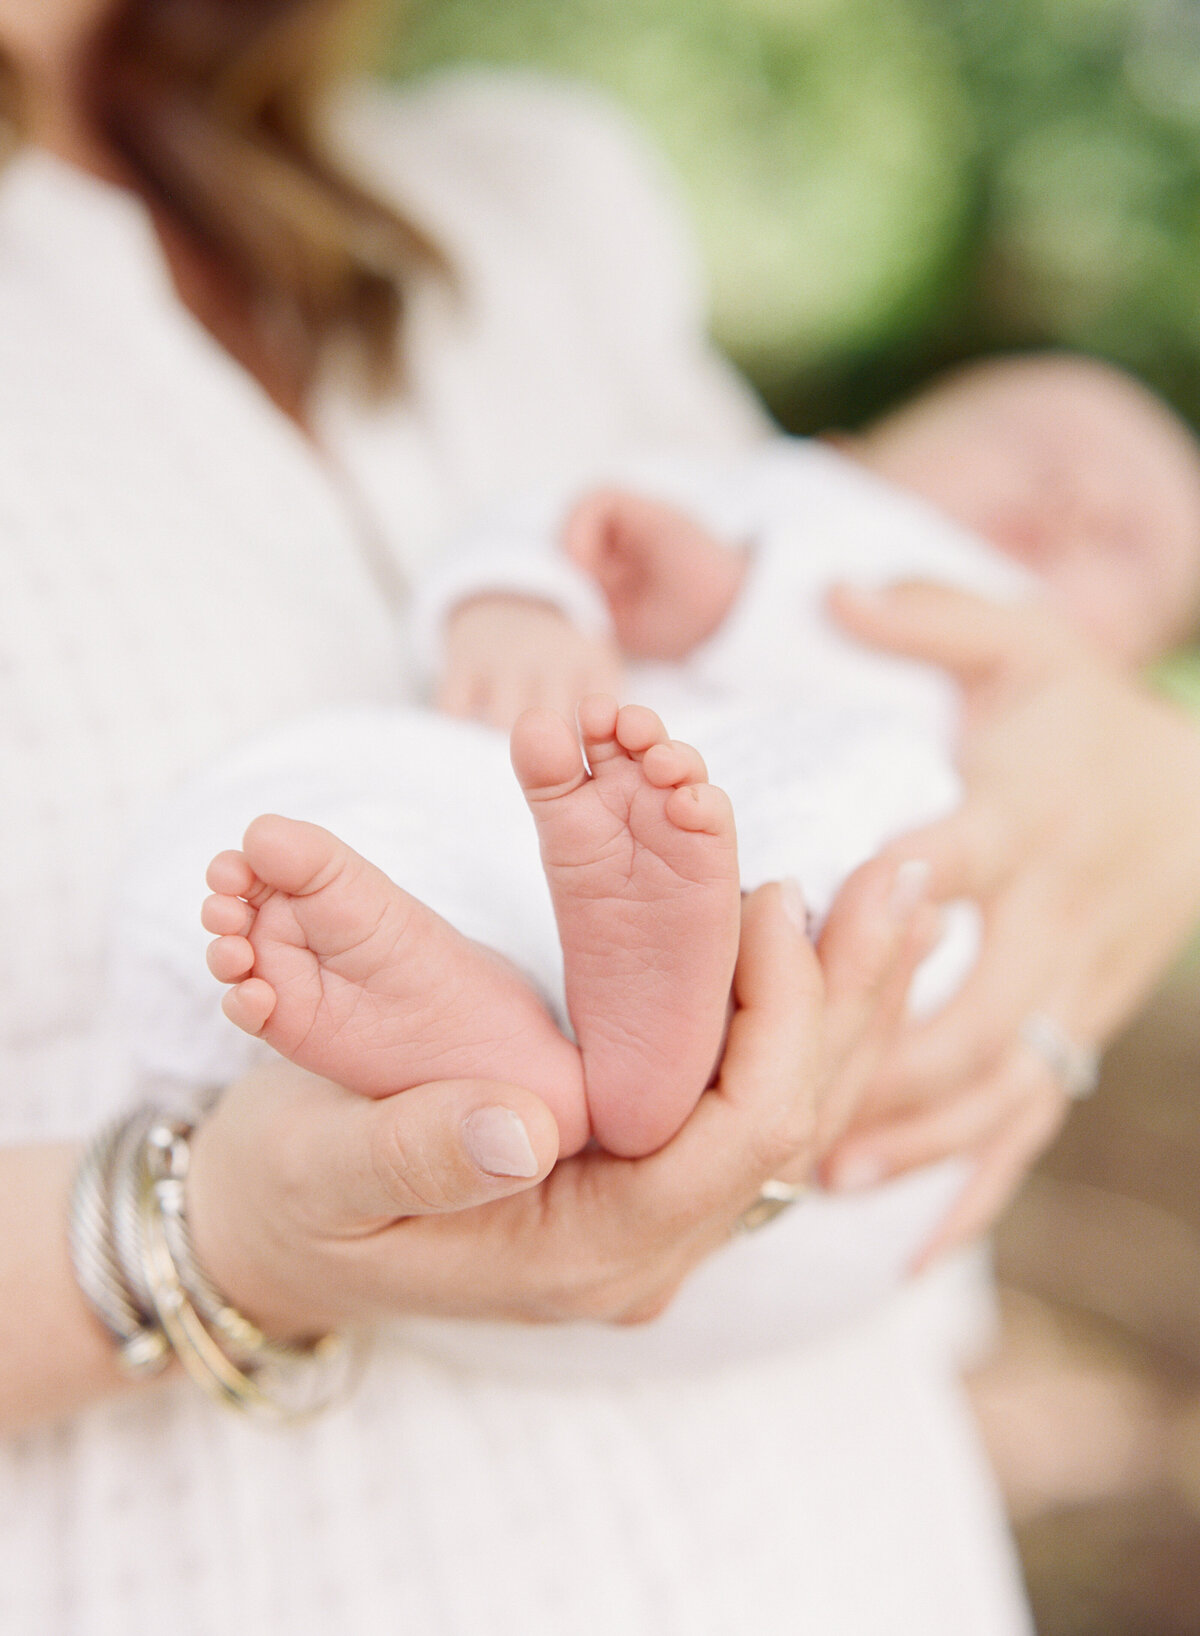 Mom holds baby toes in Mebane NC newborn session. Photographed by Raleigh Newborn Photographer A.J. Dunlap Photography.